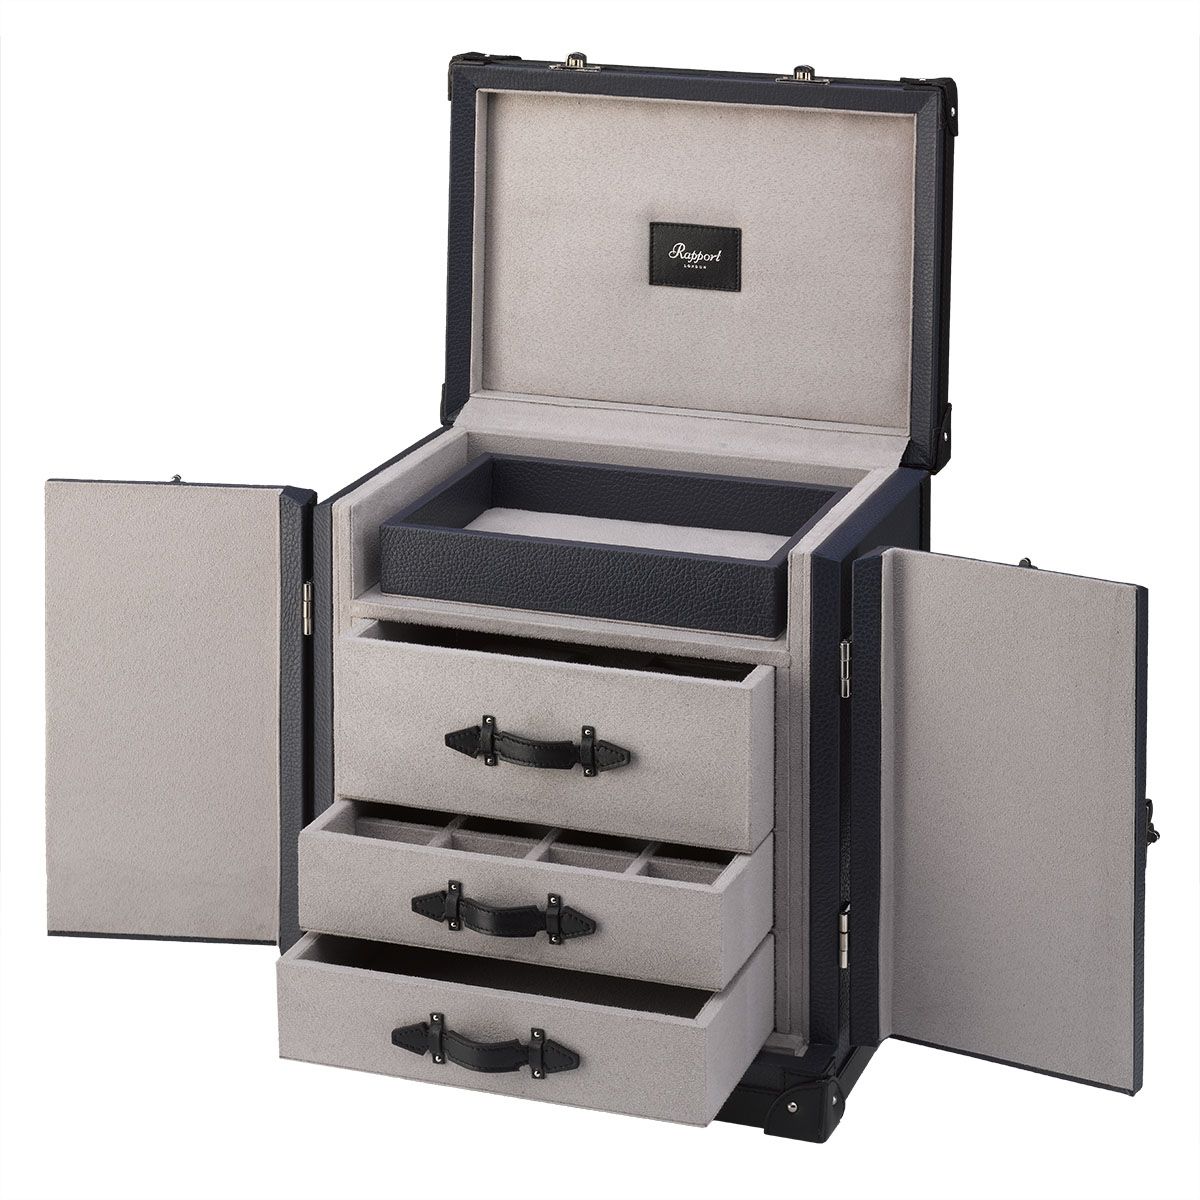 Rapport - Deluxe Jewelry Trunk in Blue Leather - J160